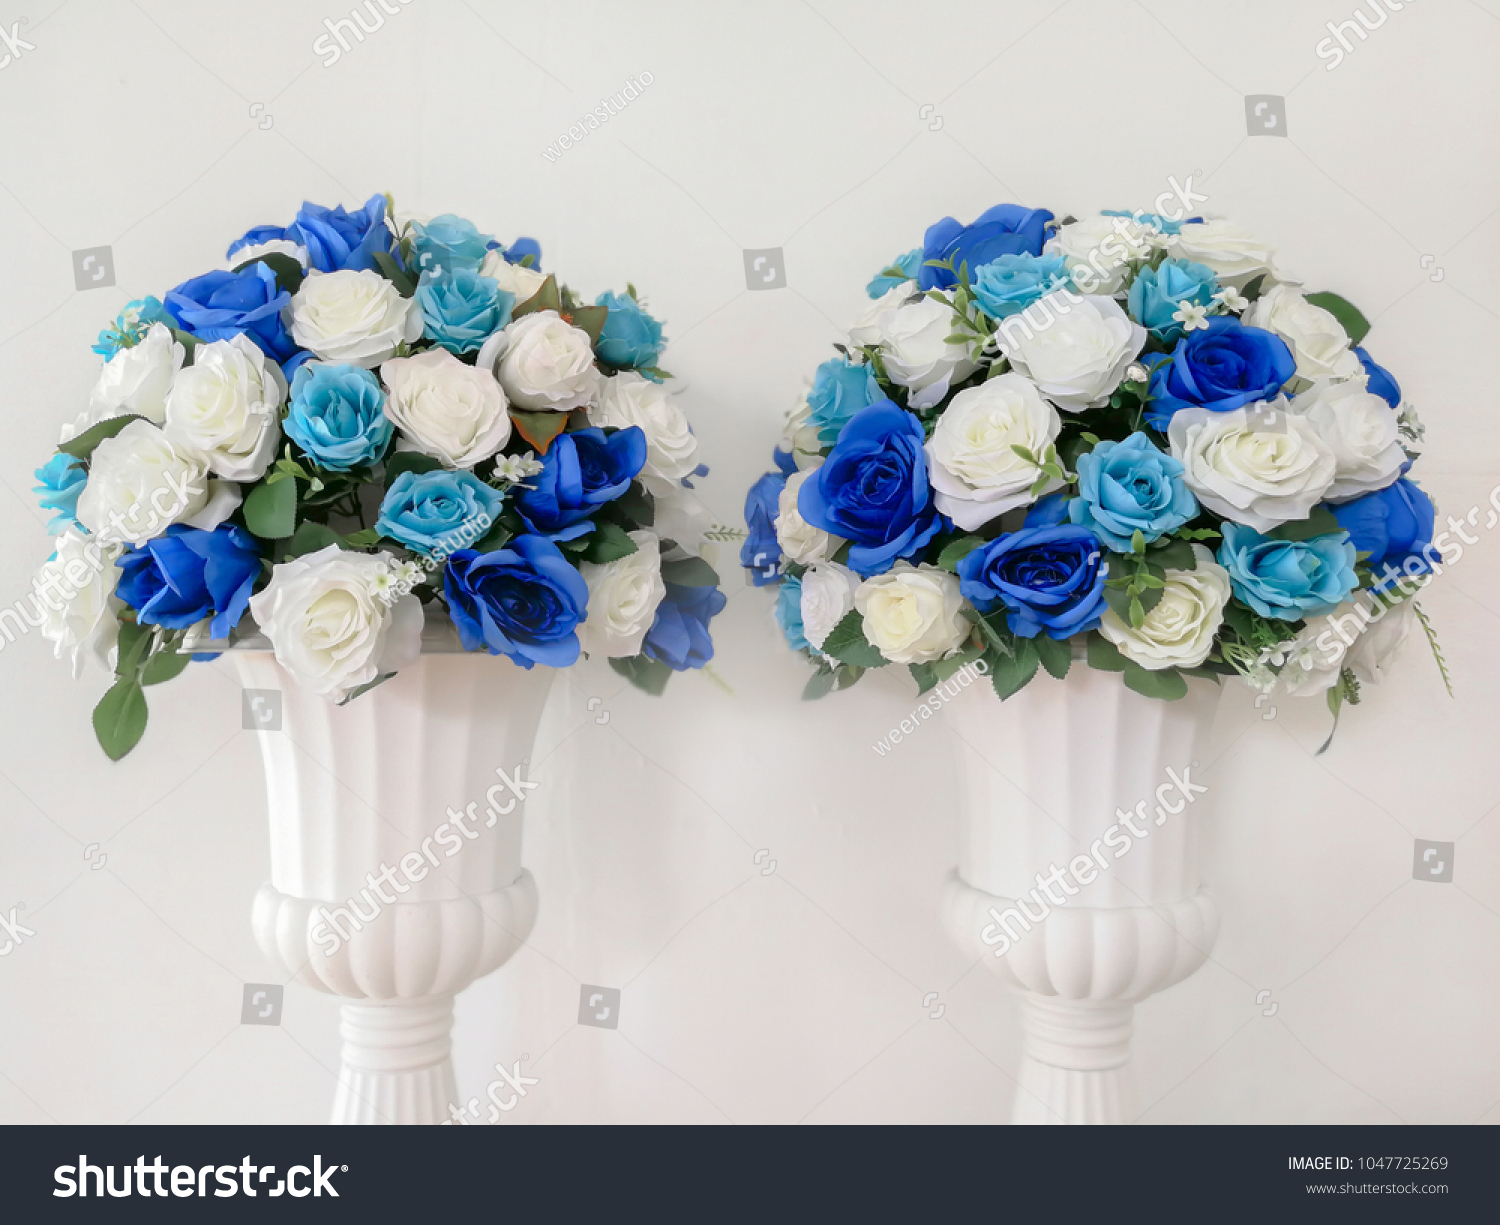 Artificial Flowers Roses Foam Pink Blue Stock Photo Edit Now 1047725269